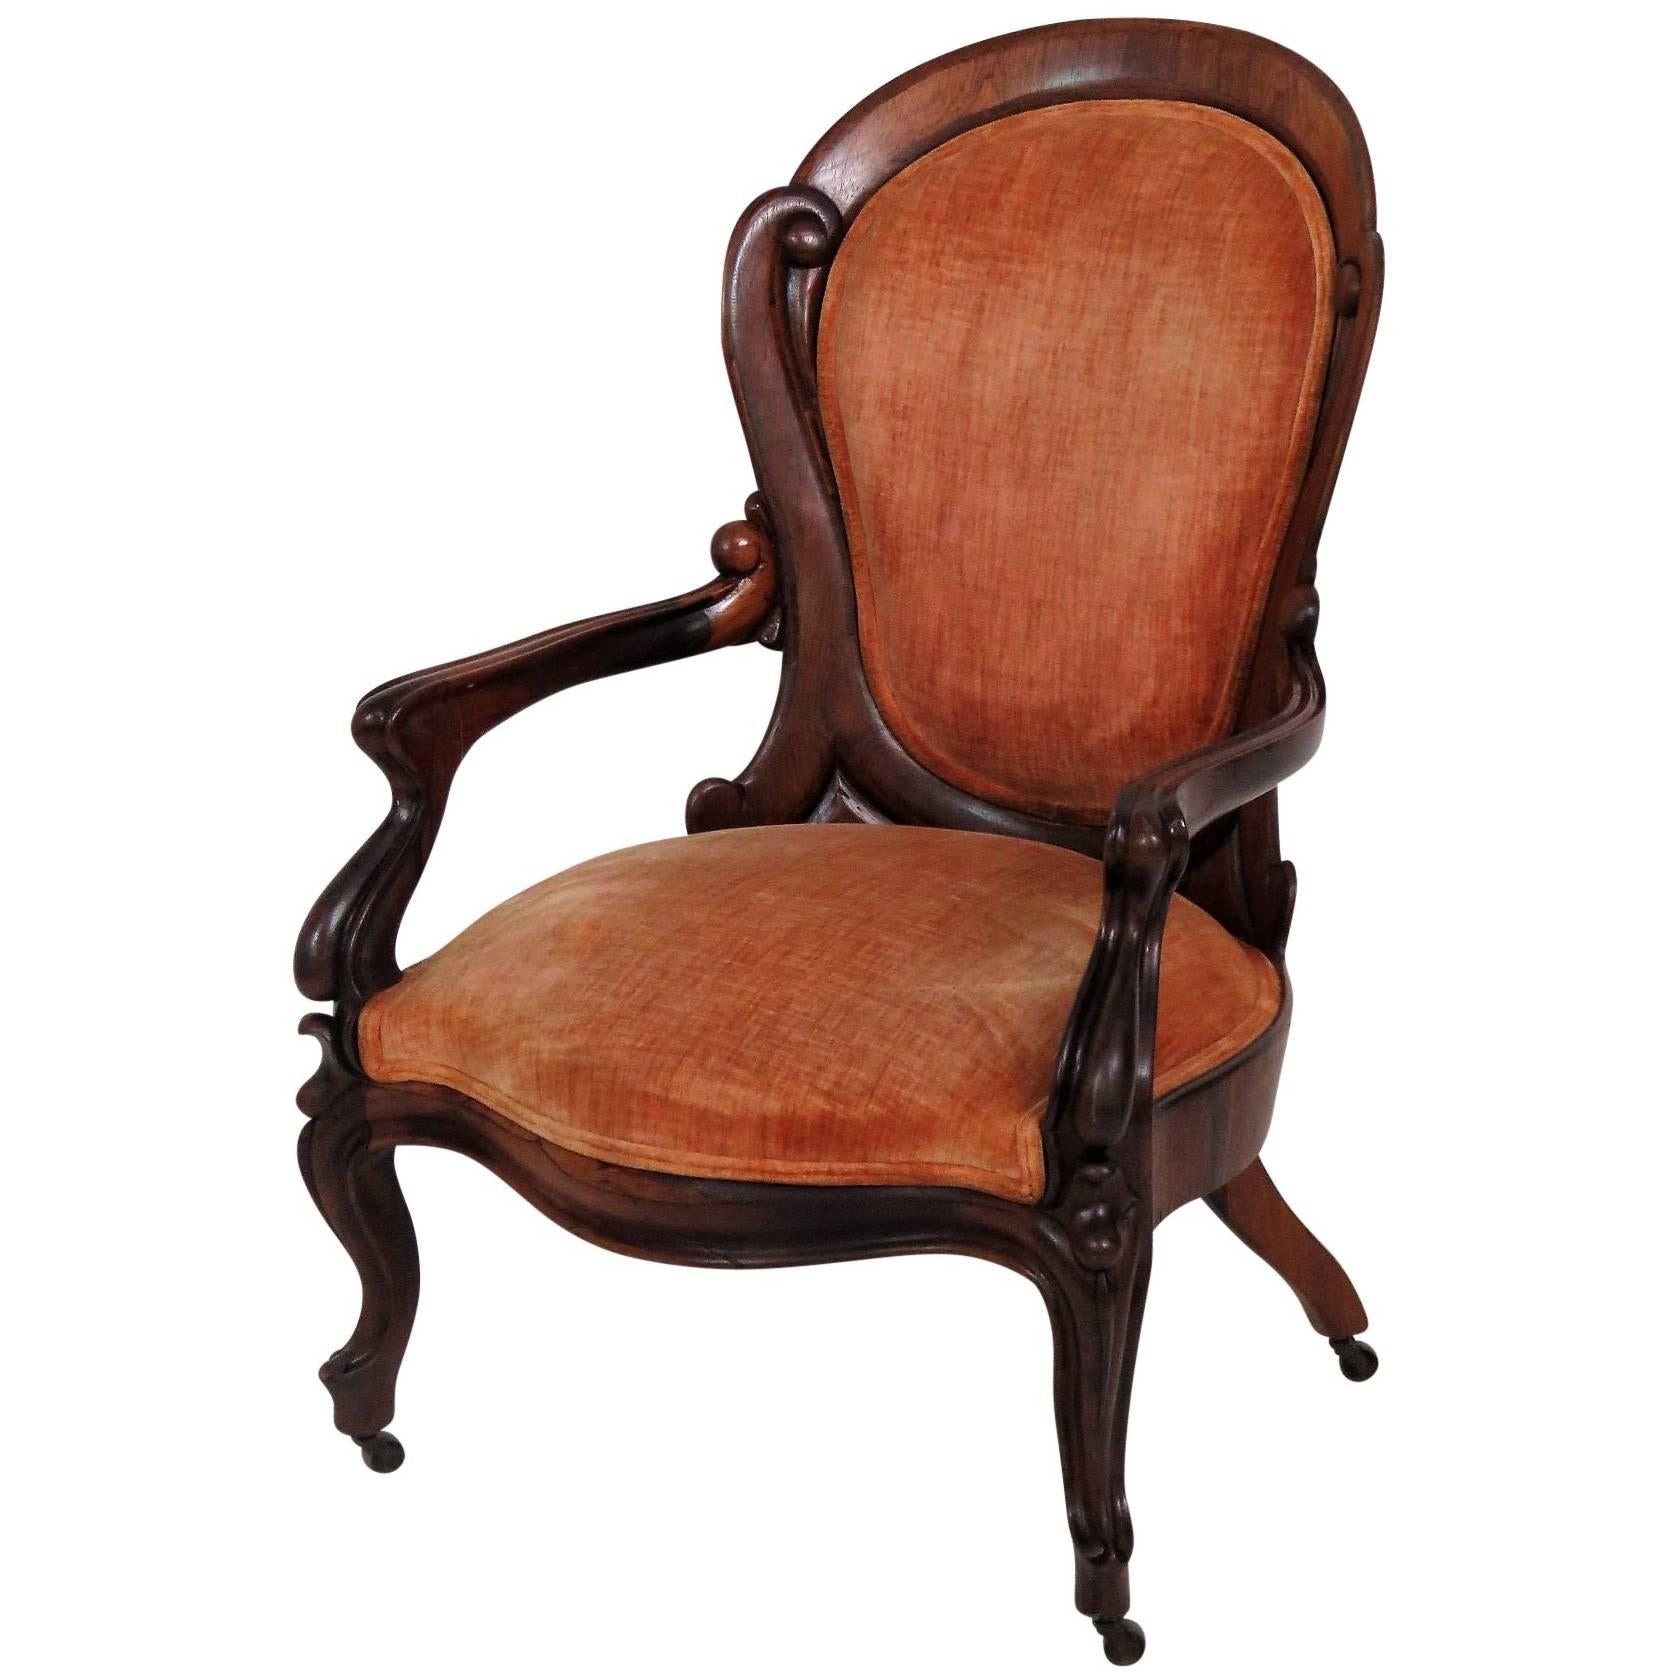 John Henry Belter Style Walnut Laminated Upholstered Ladie's Chair